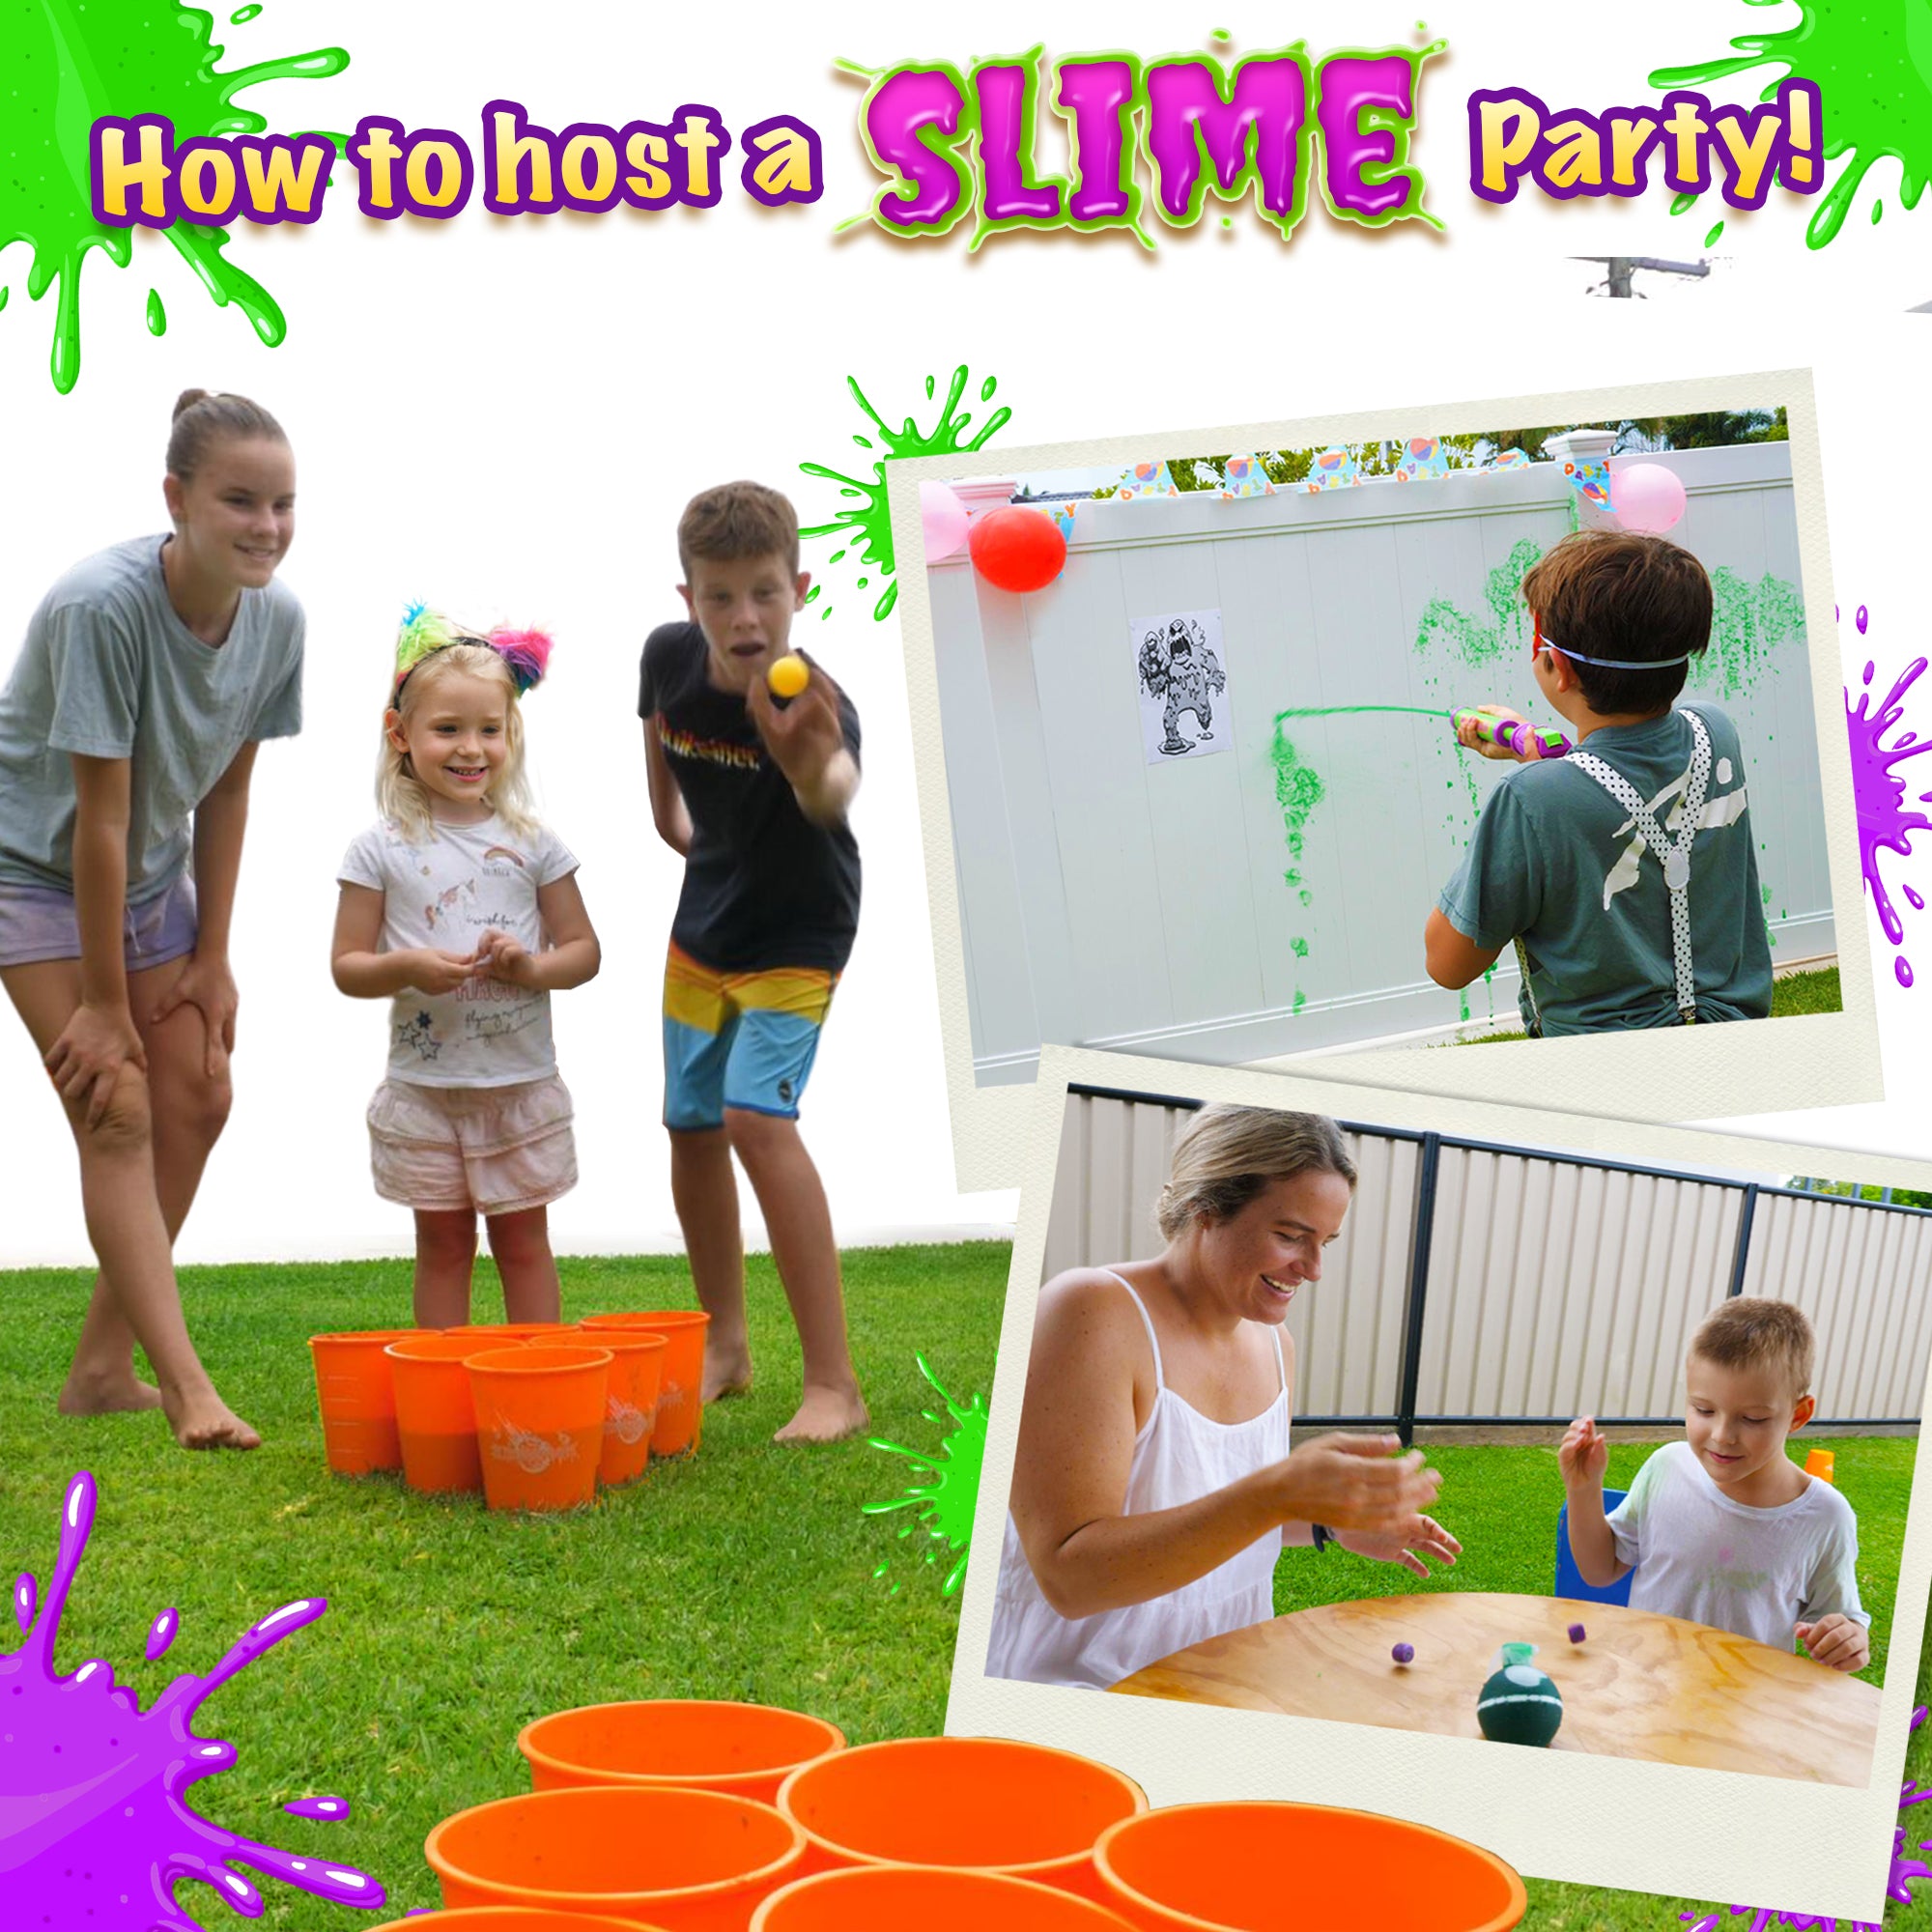 slime party decorations｜TikTok Search